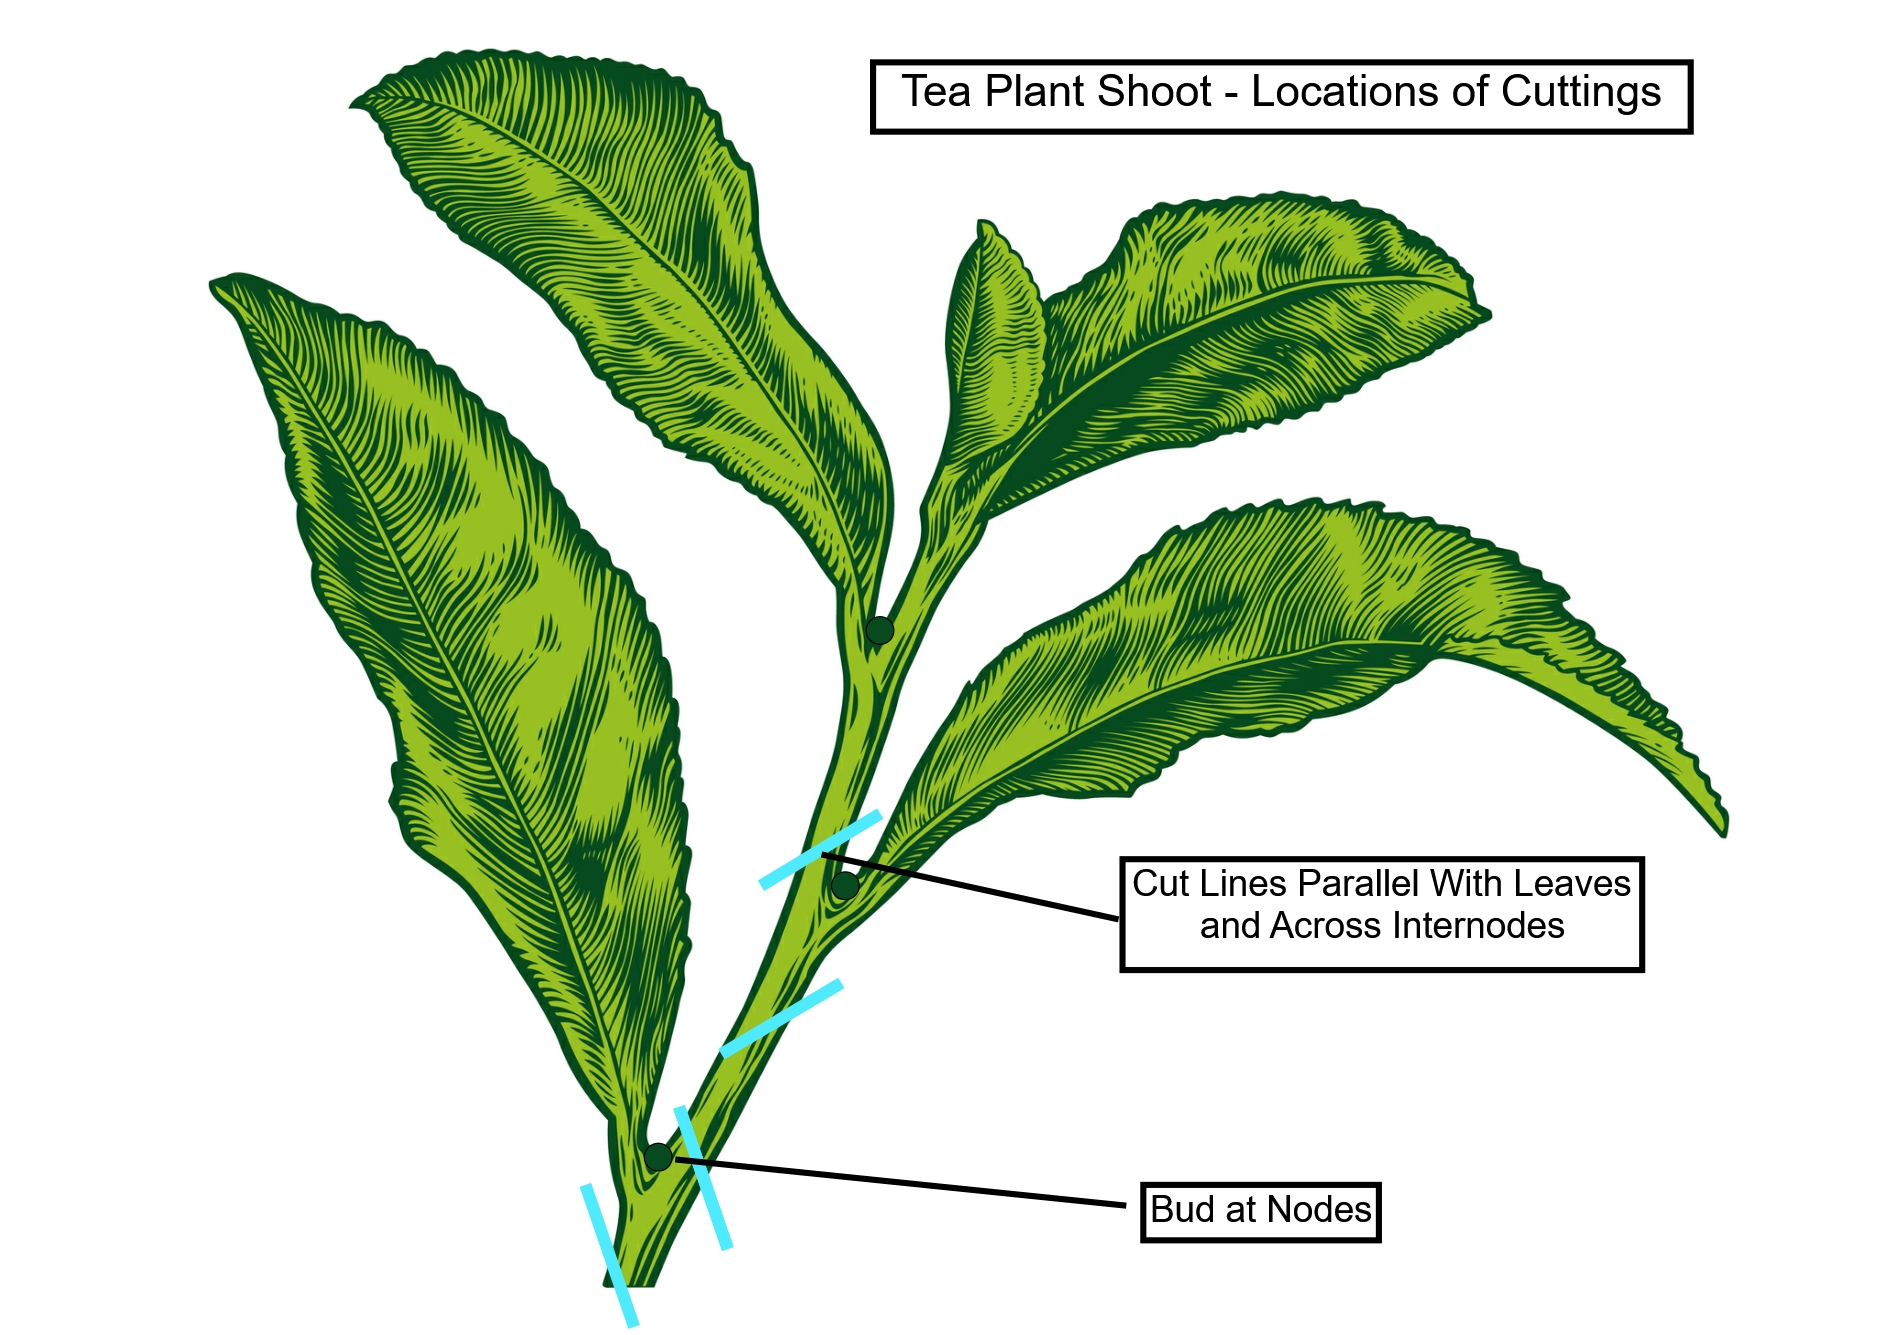 Farming Pure Ceylon Tea - Tea Diagram Shows Locations of Cuttings To Be Used For Cuttings